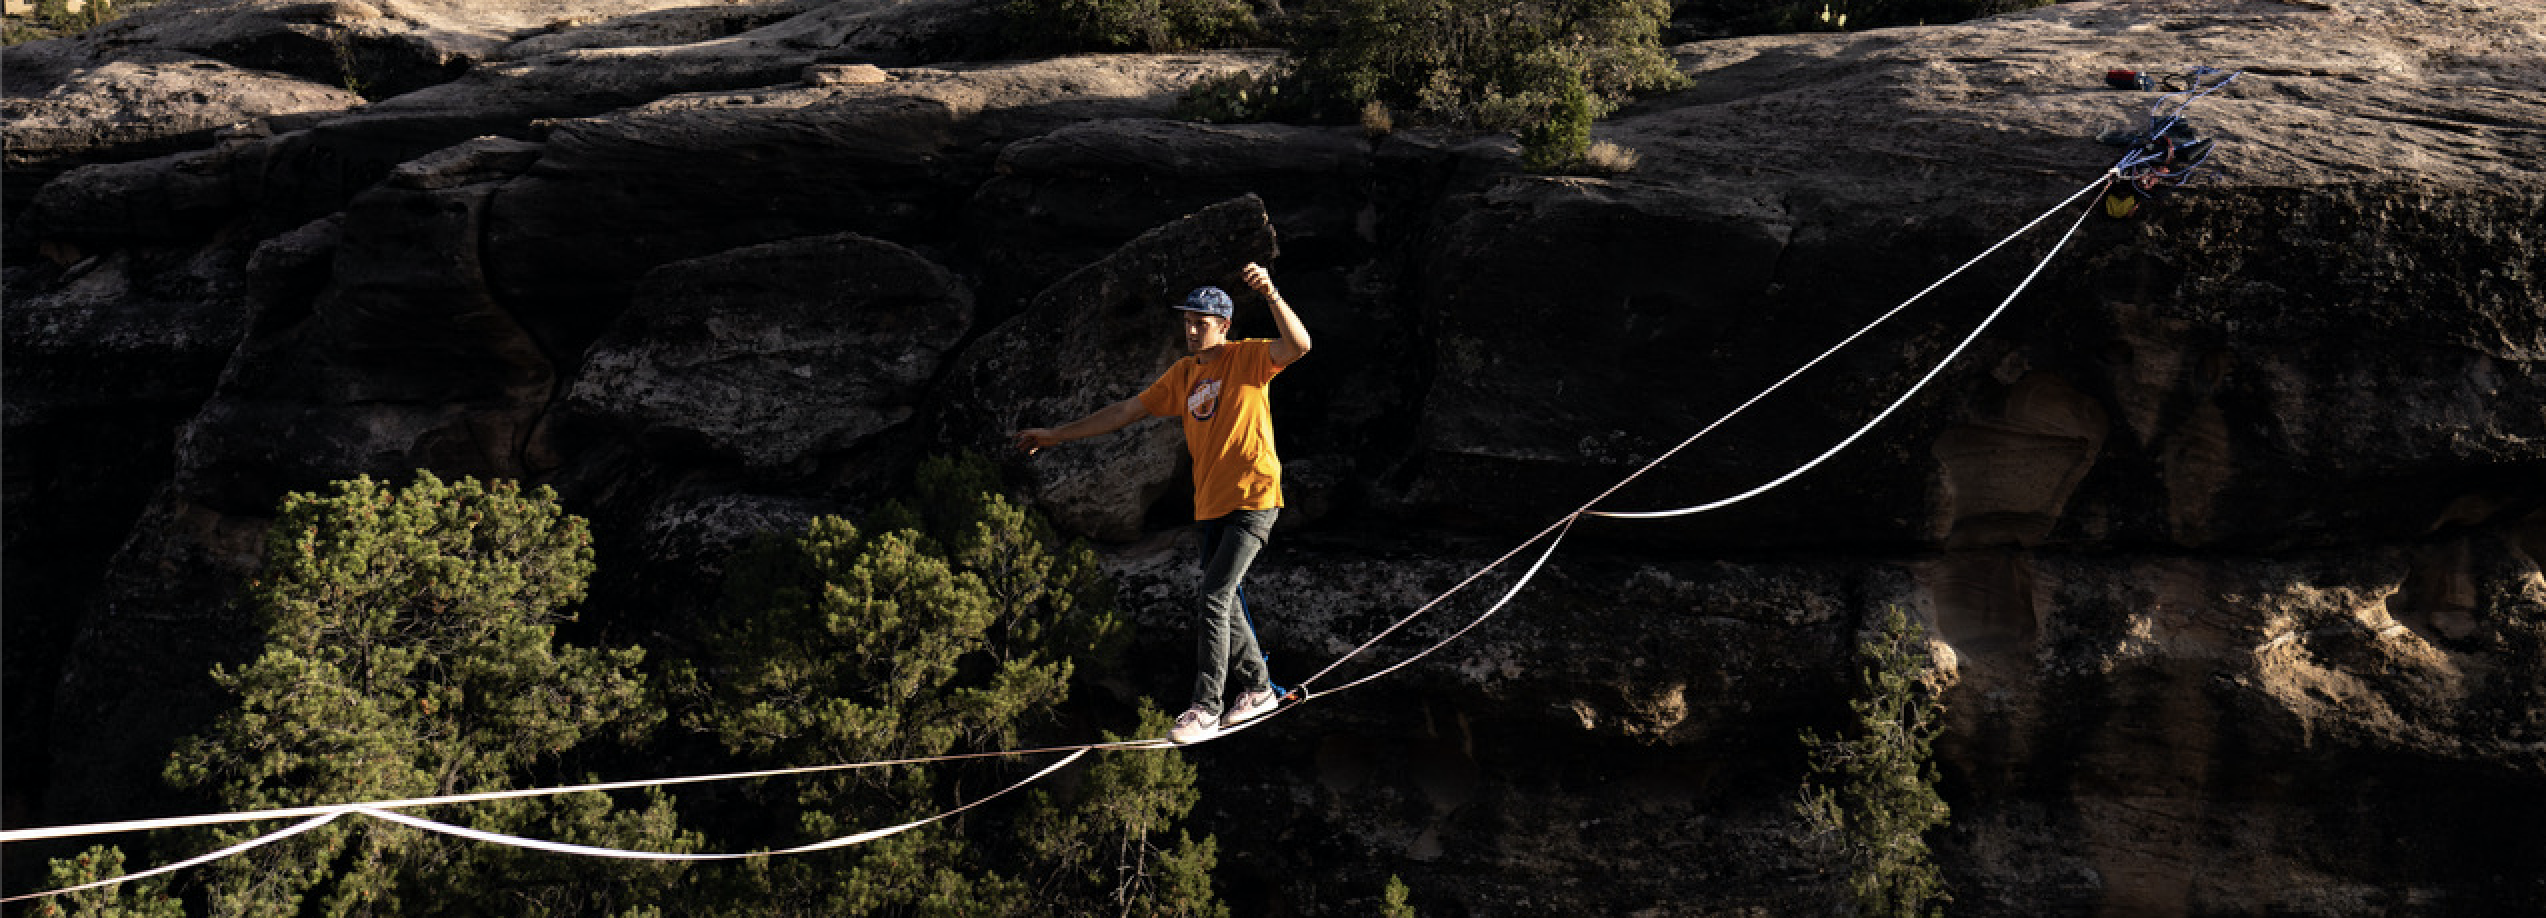 A person walking across a tightrope between two cliffs